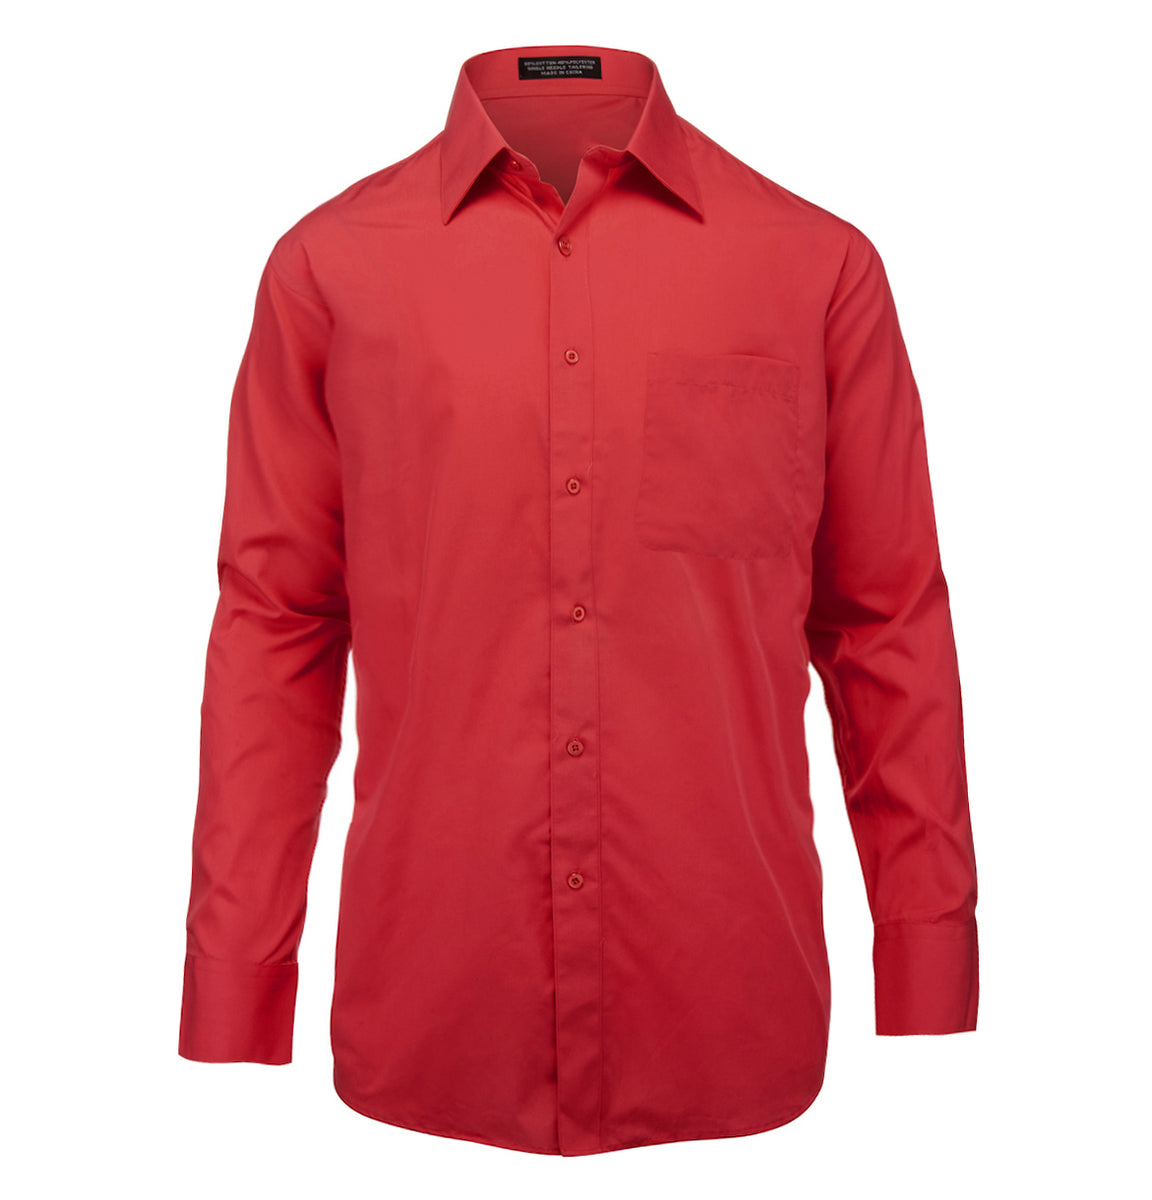 The Essential Solid True Red Men's Dress Shirt | Paul Malone